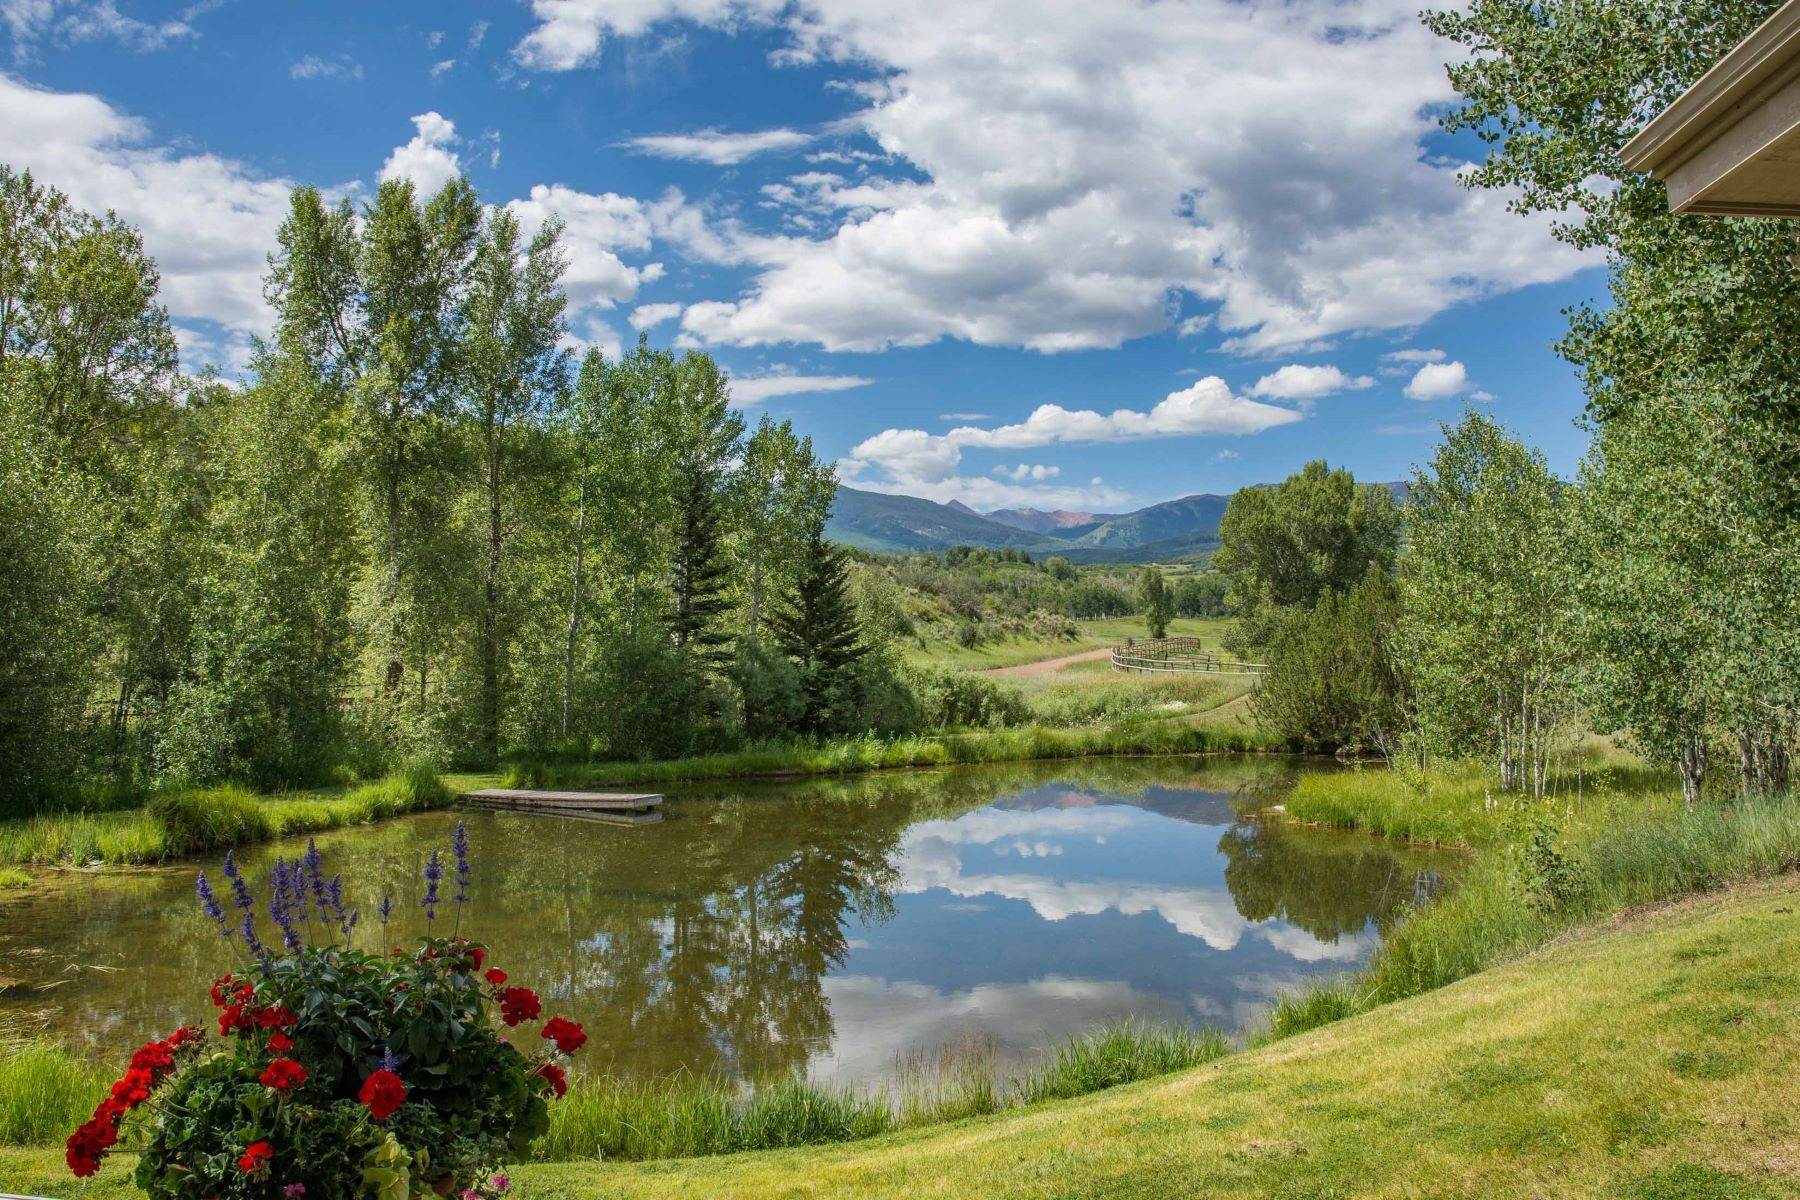 Farm and Ranch Properties للـ Sale في RARE and UNIQUE opportunity to own the heart of the renowned McCabe Ranch! 1321 Elk Creek & TBD McCabe Ranch Old Snowmass, Colorado 81654 United States